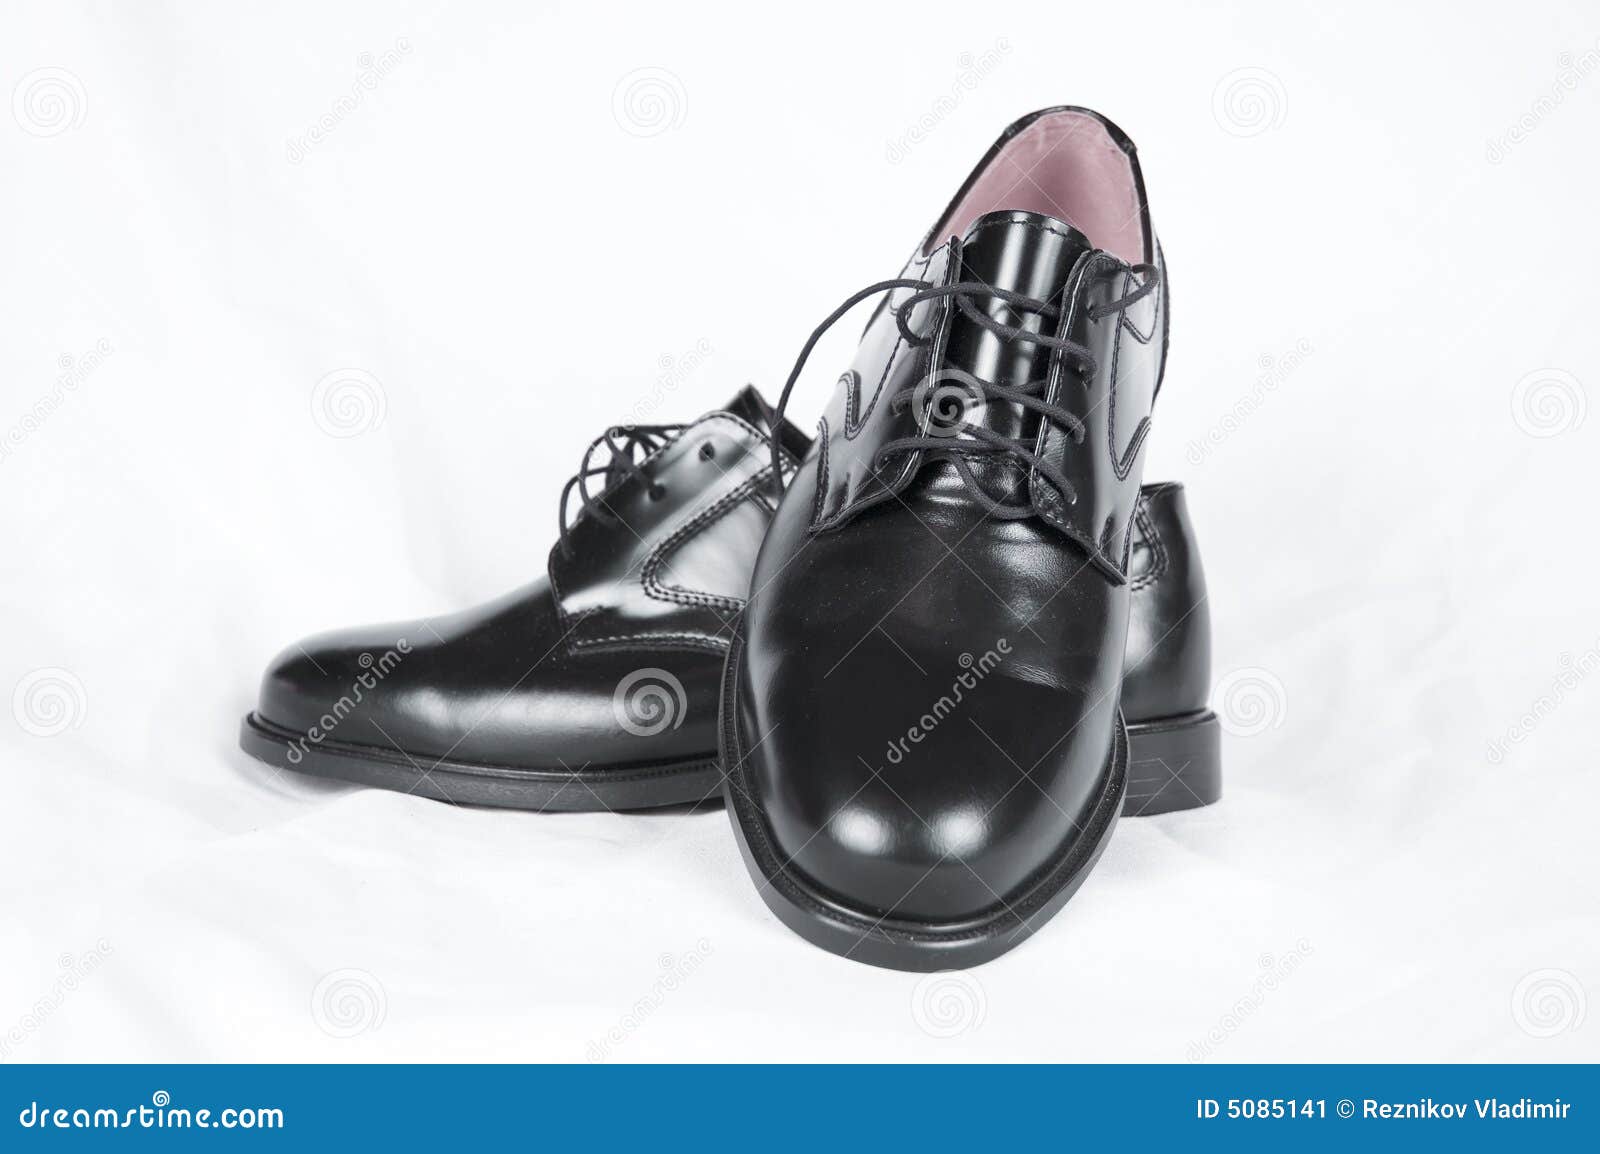 Shoes stock image. Image of object, shoe, background, objects - 5085141